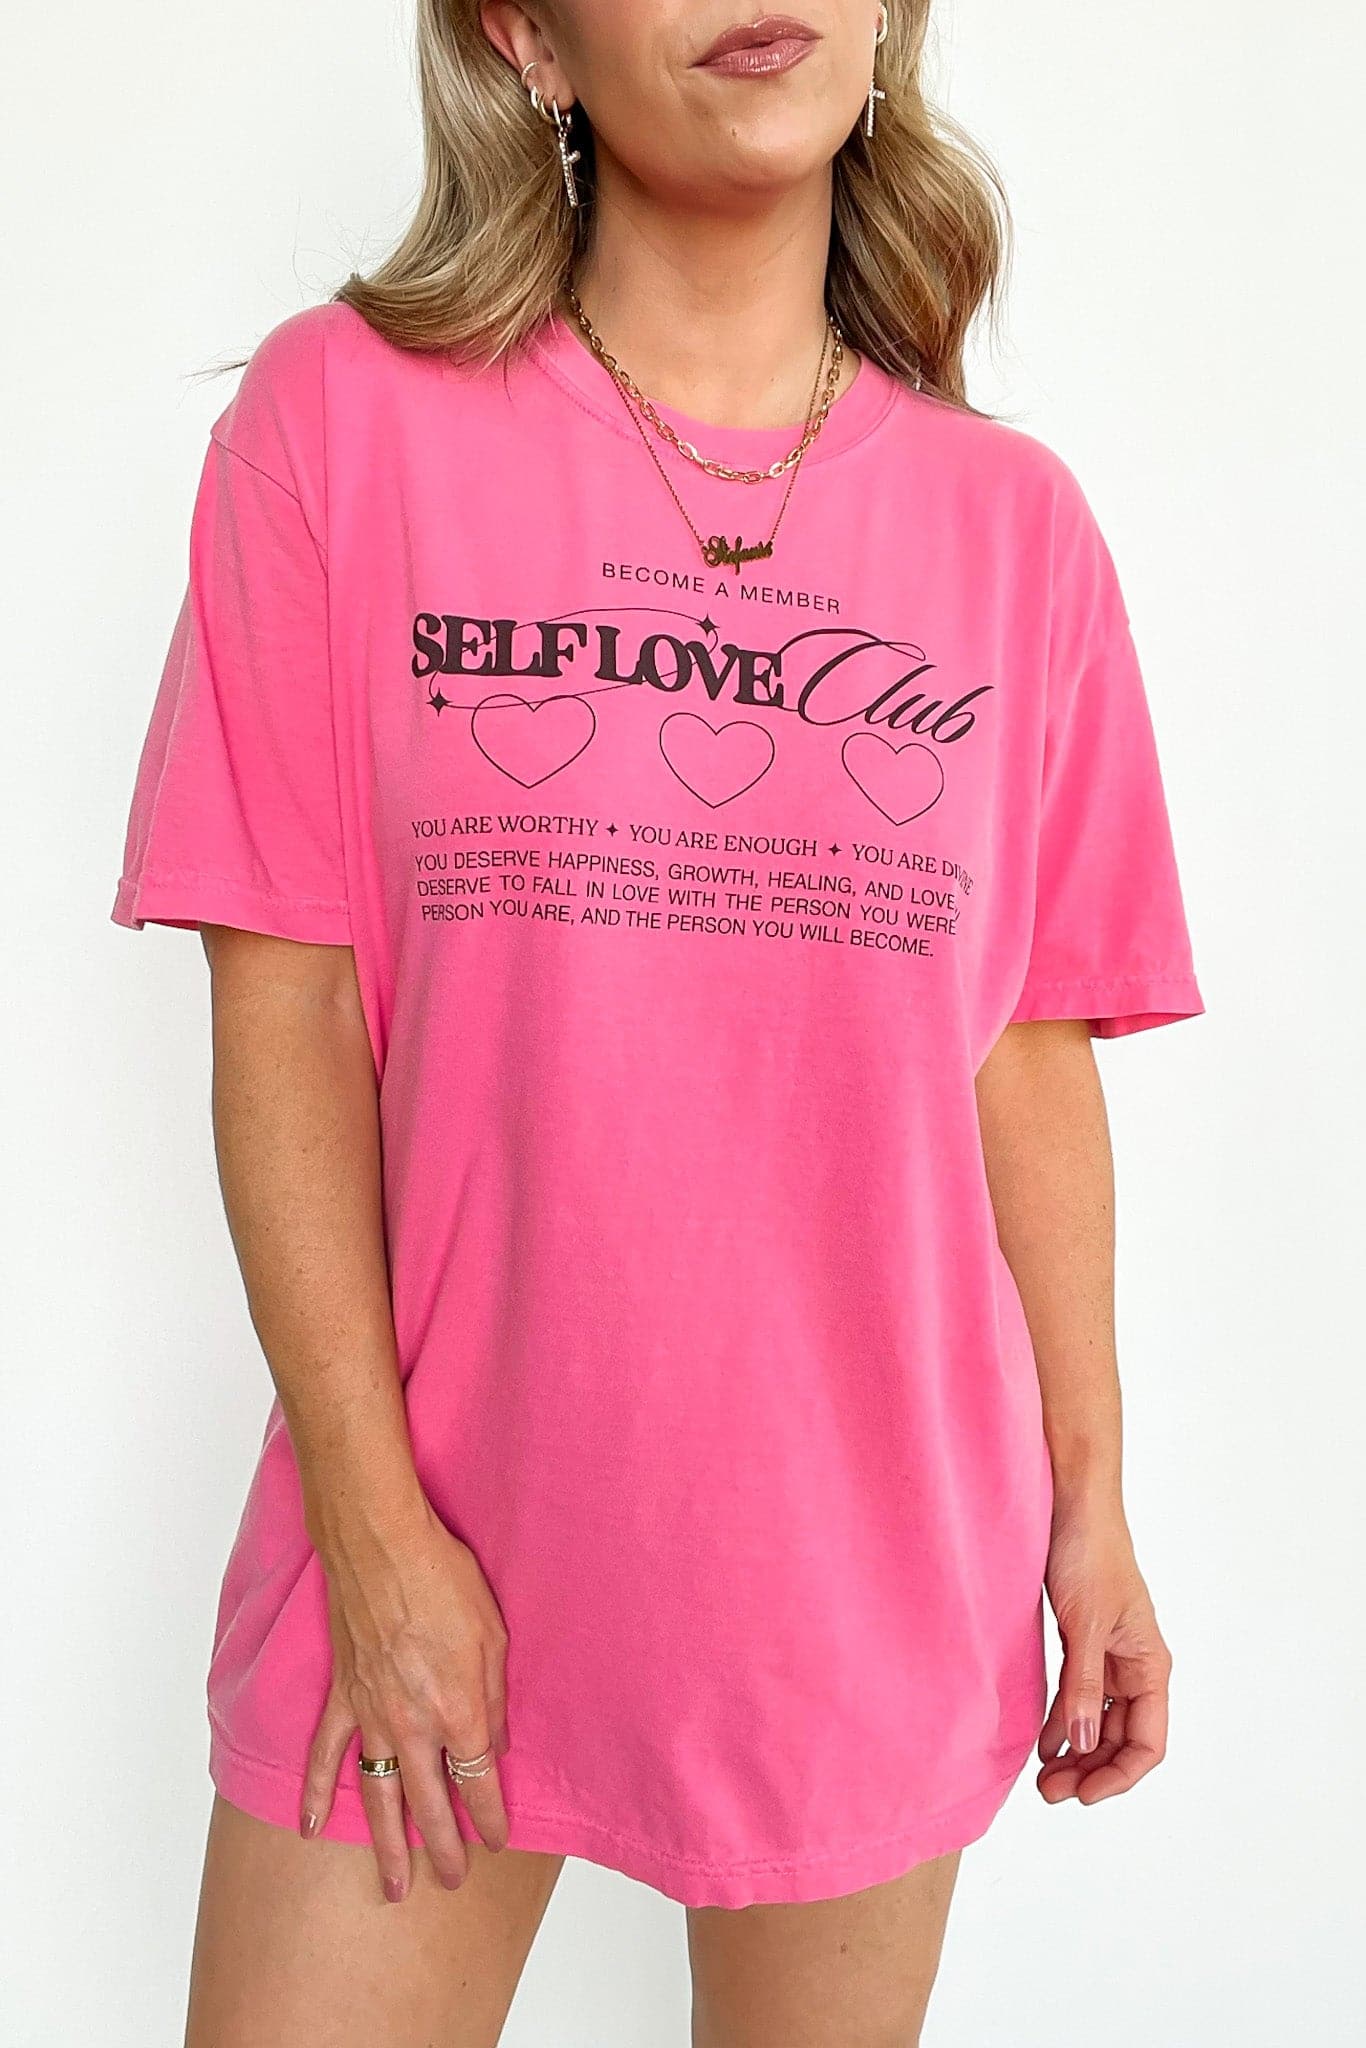  Member of the Self Love Club Vintage Graphic Tee | CURVE - kitchencabinetmagic